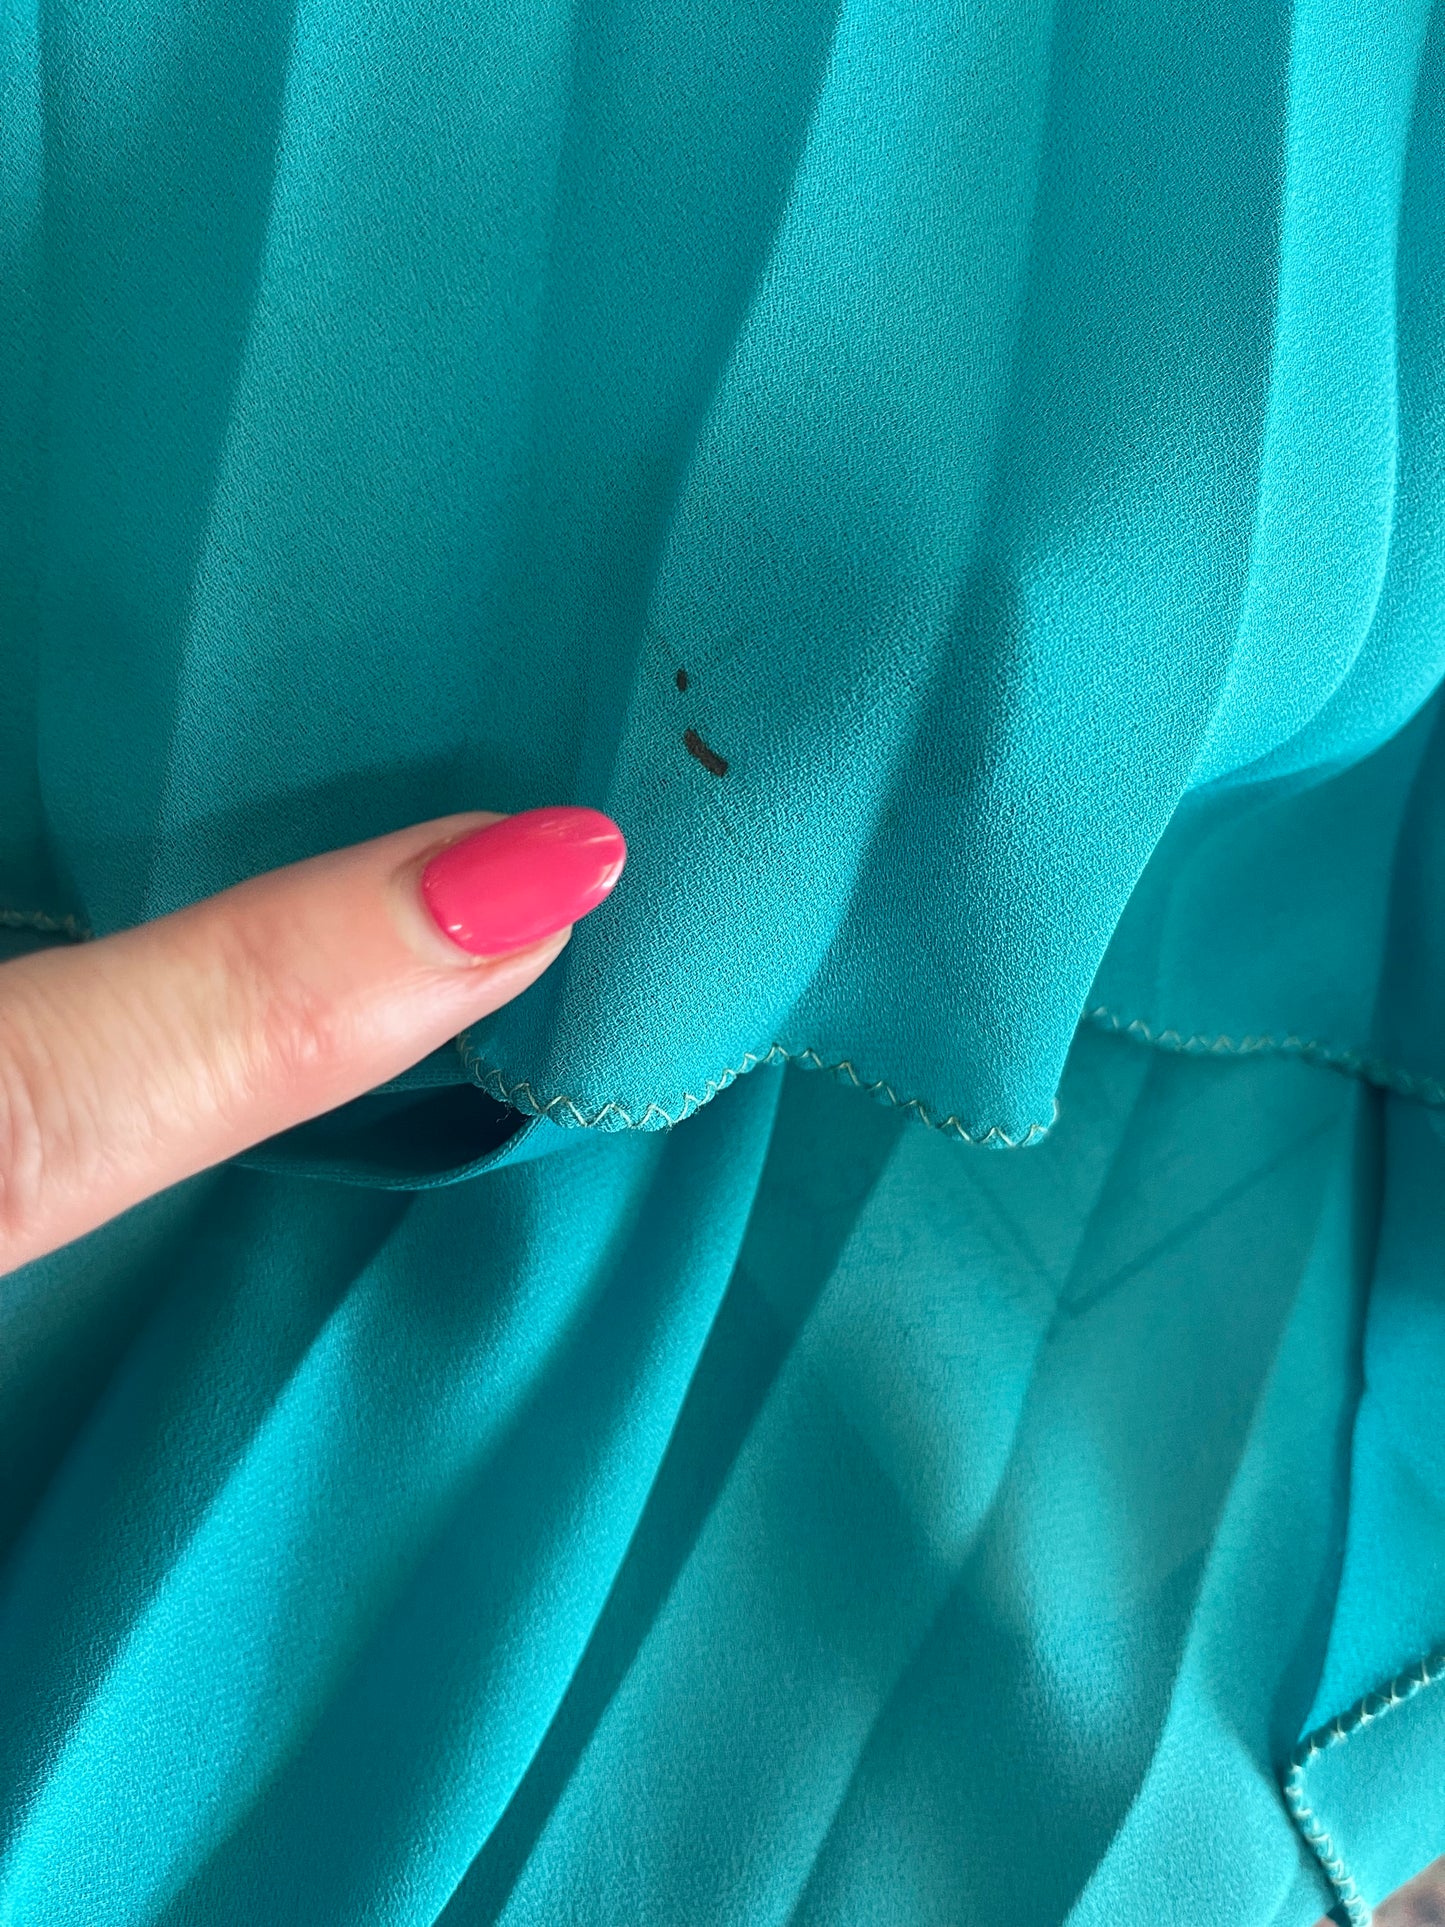 Vintage 1970s teal polyester pleated dress size 10. 100cm Bust